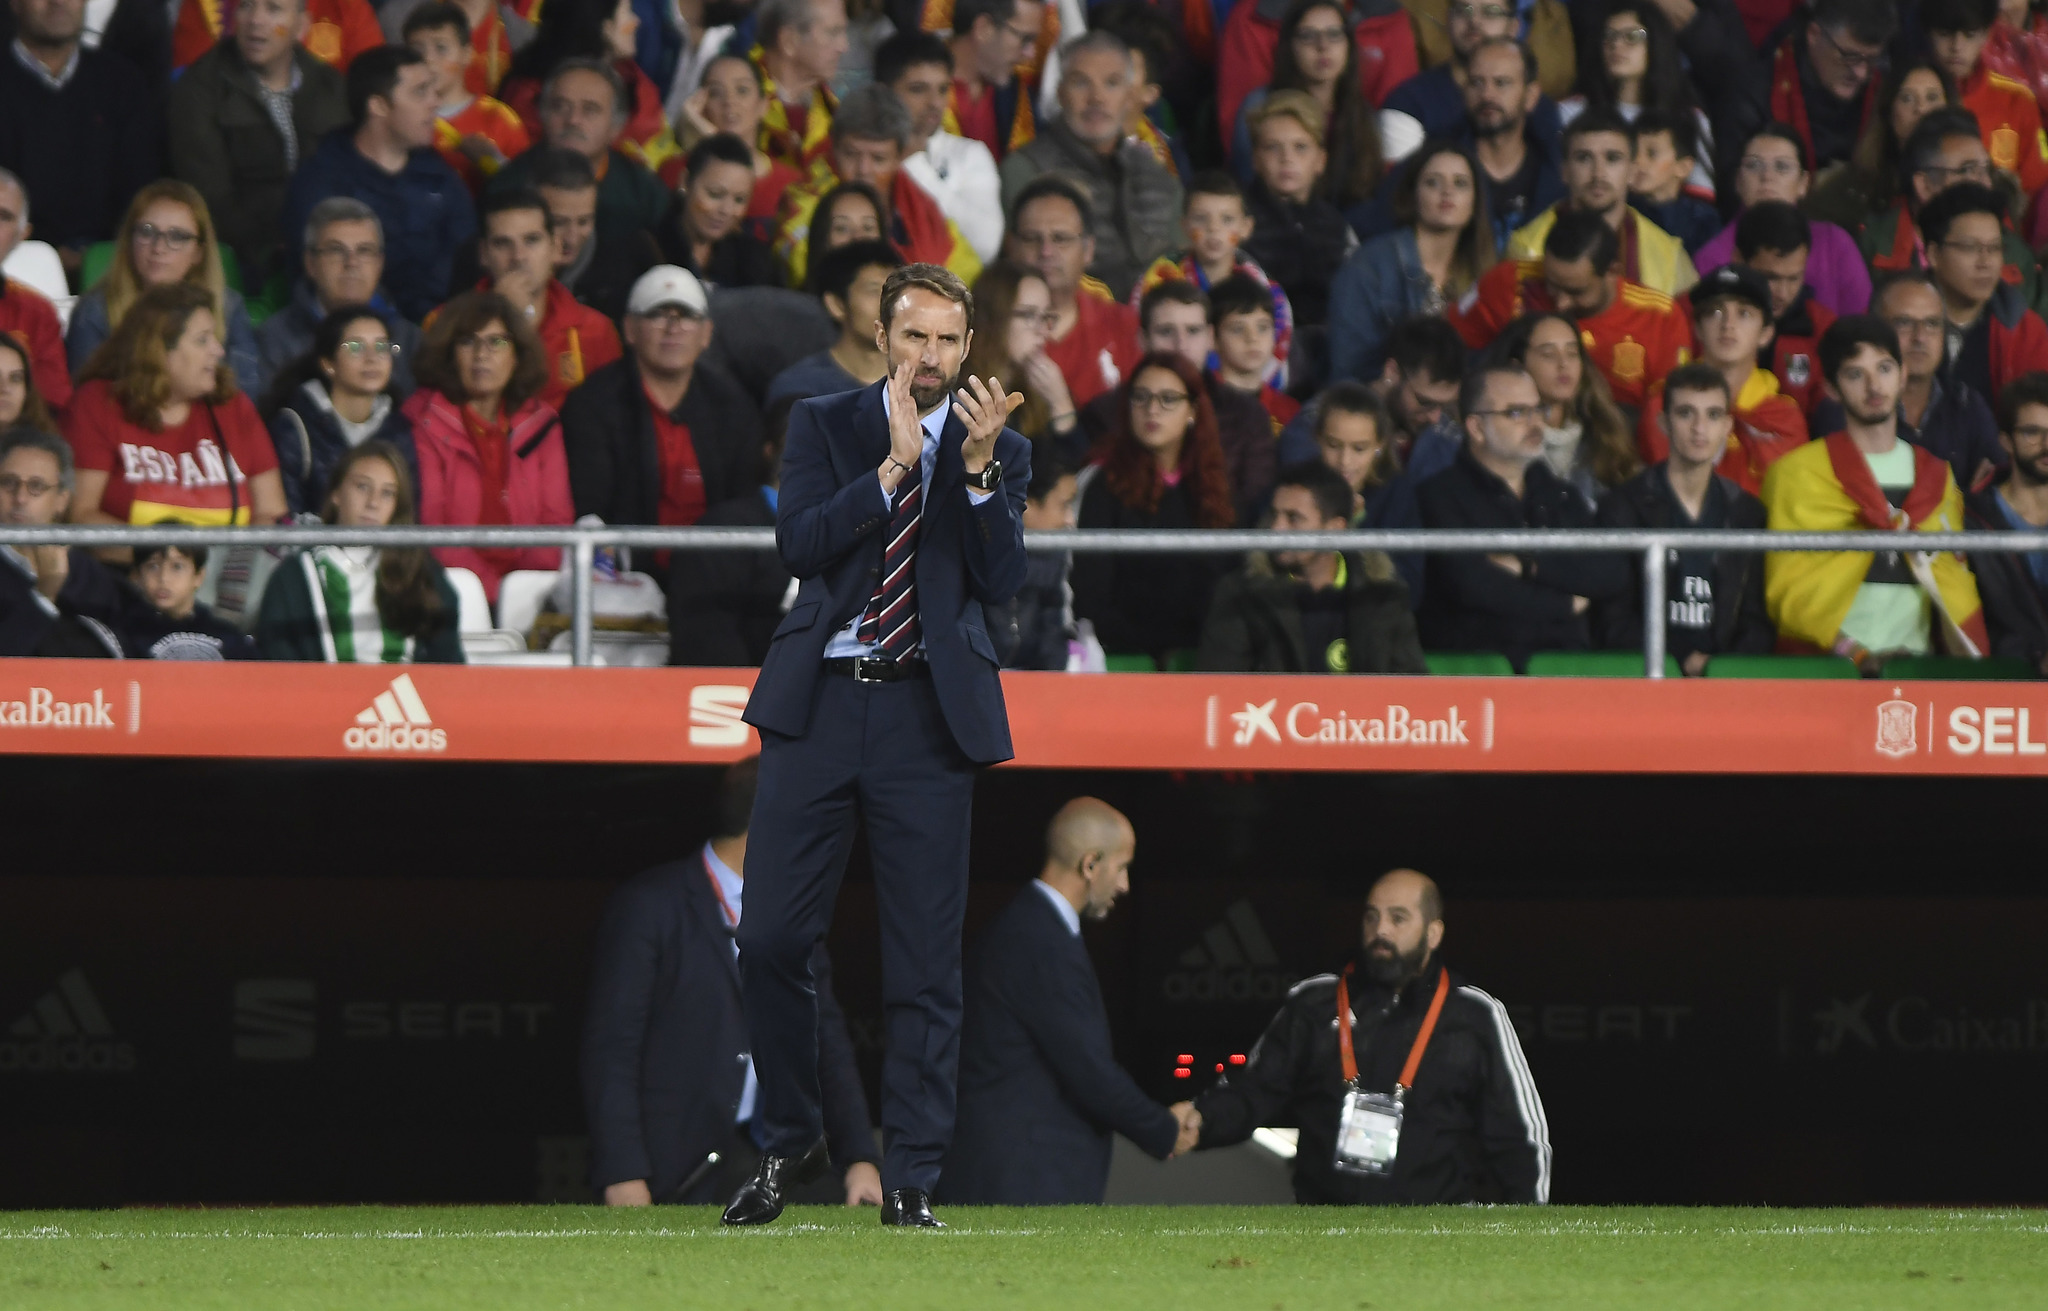 Southgate during England's clash against Spain in the UEFA Nations League group stages